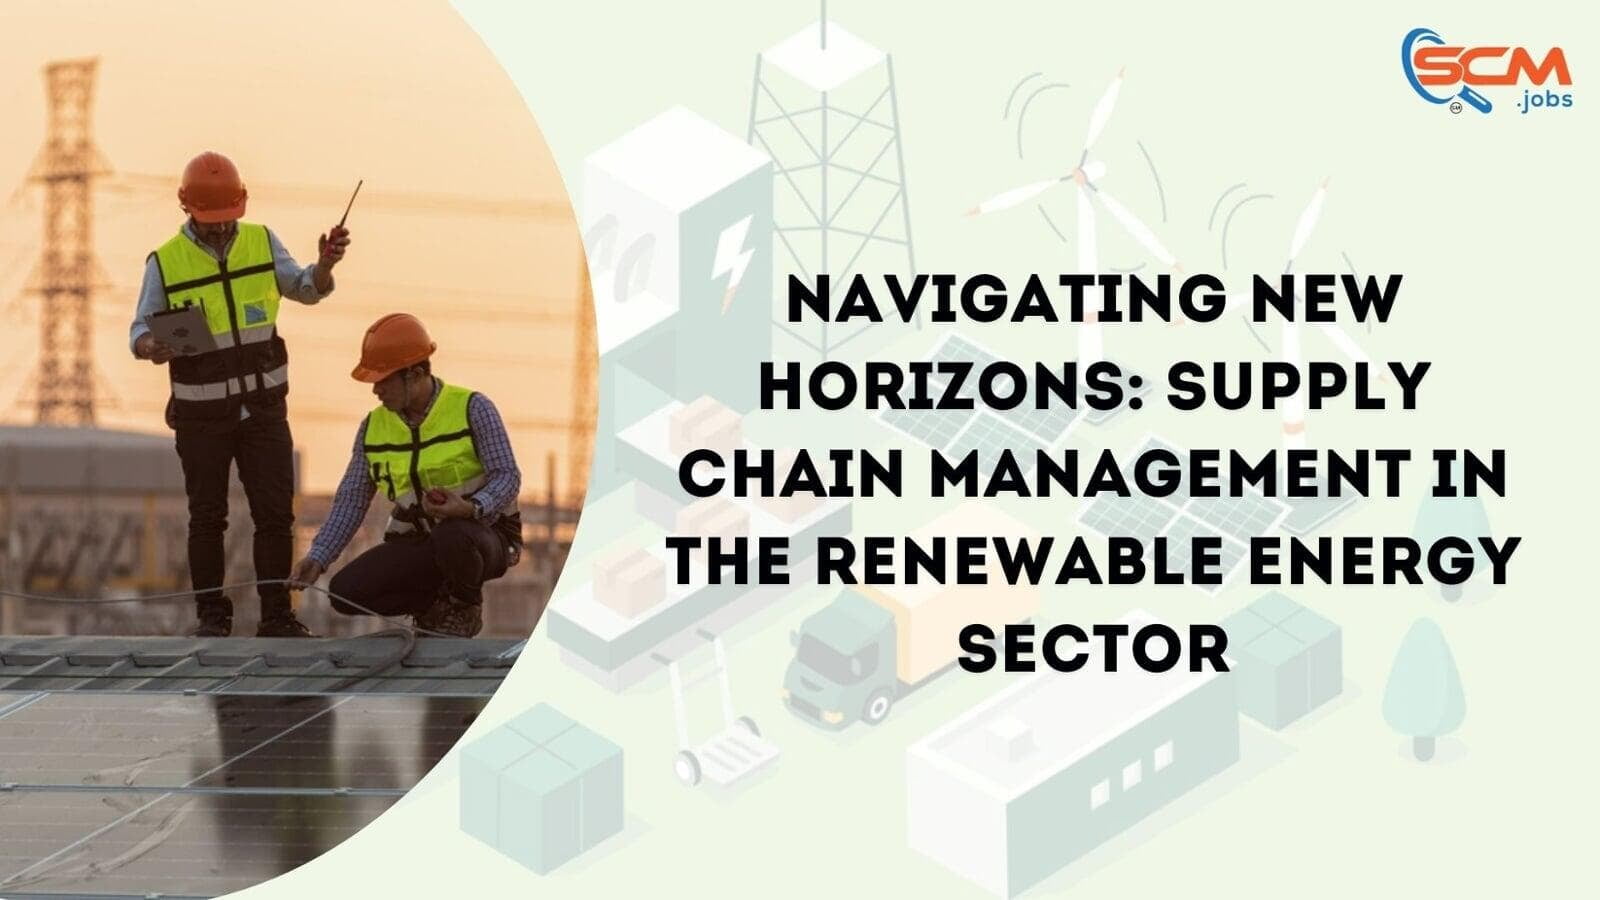 Navigating New Horizons: Supply Chain Management in the Renewable Energy Sector